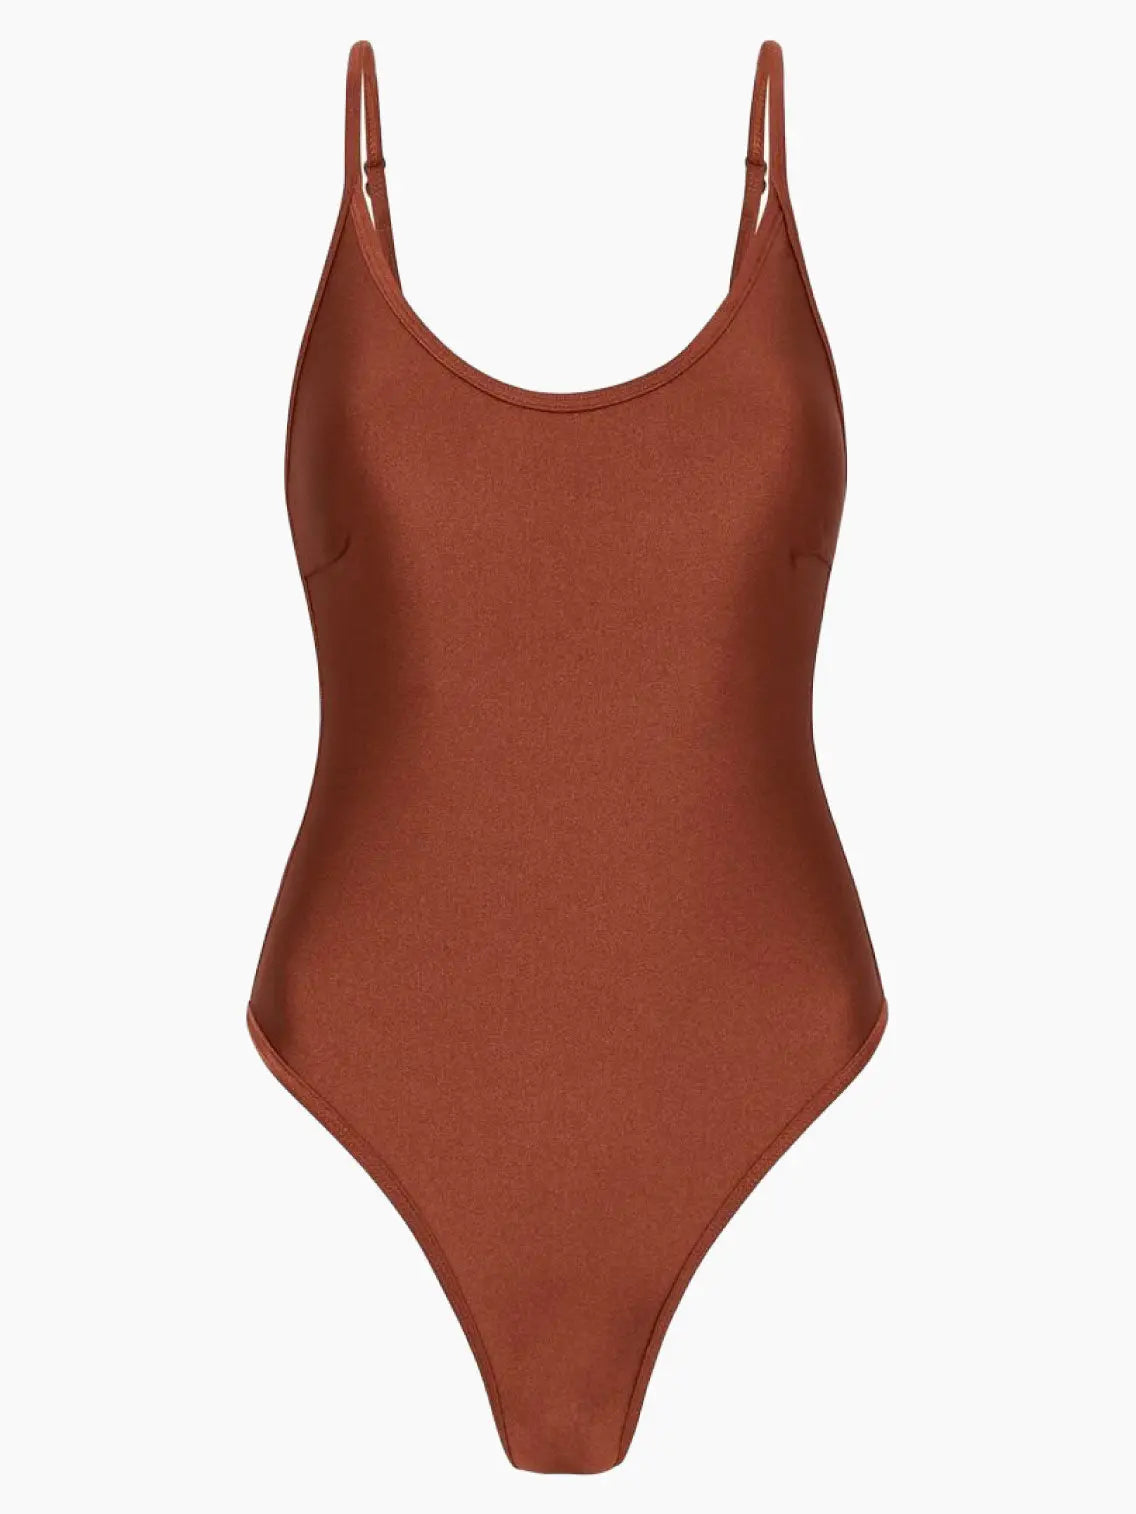 A rust-colored, one-piece swimsuit with thin shoulder straps and a scoop neckline, displayed on a white background. Available exclusively at Bassalstore, the Terracotta Scoop One Piece Swimwear by Innes Lauren features a sleek, minimalist design with high-cut legs perfect for any Barcelona beach day.